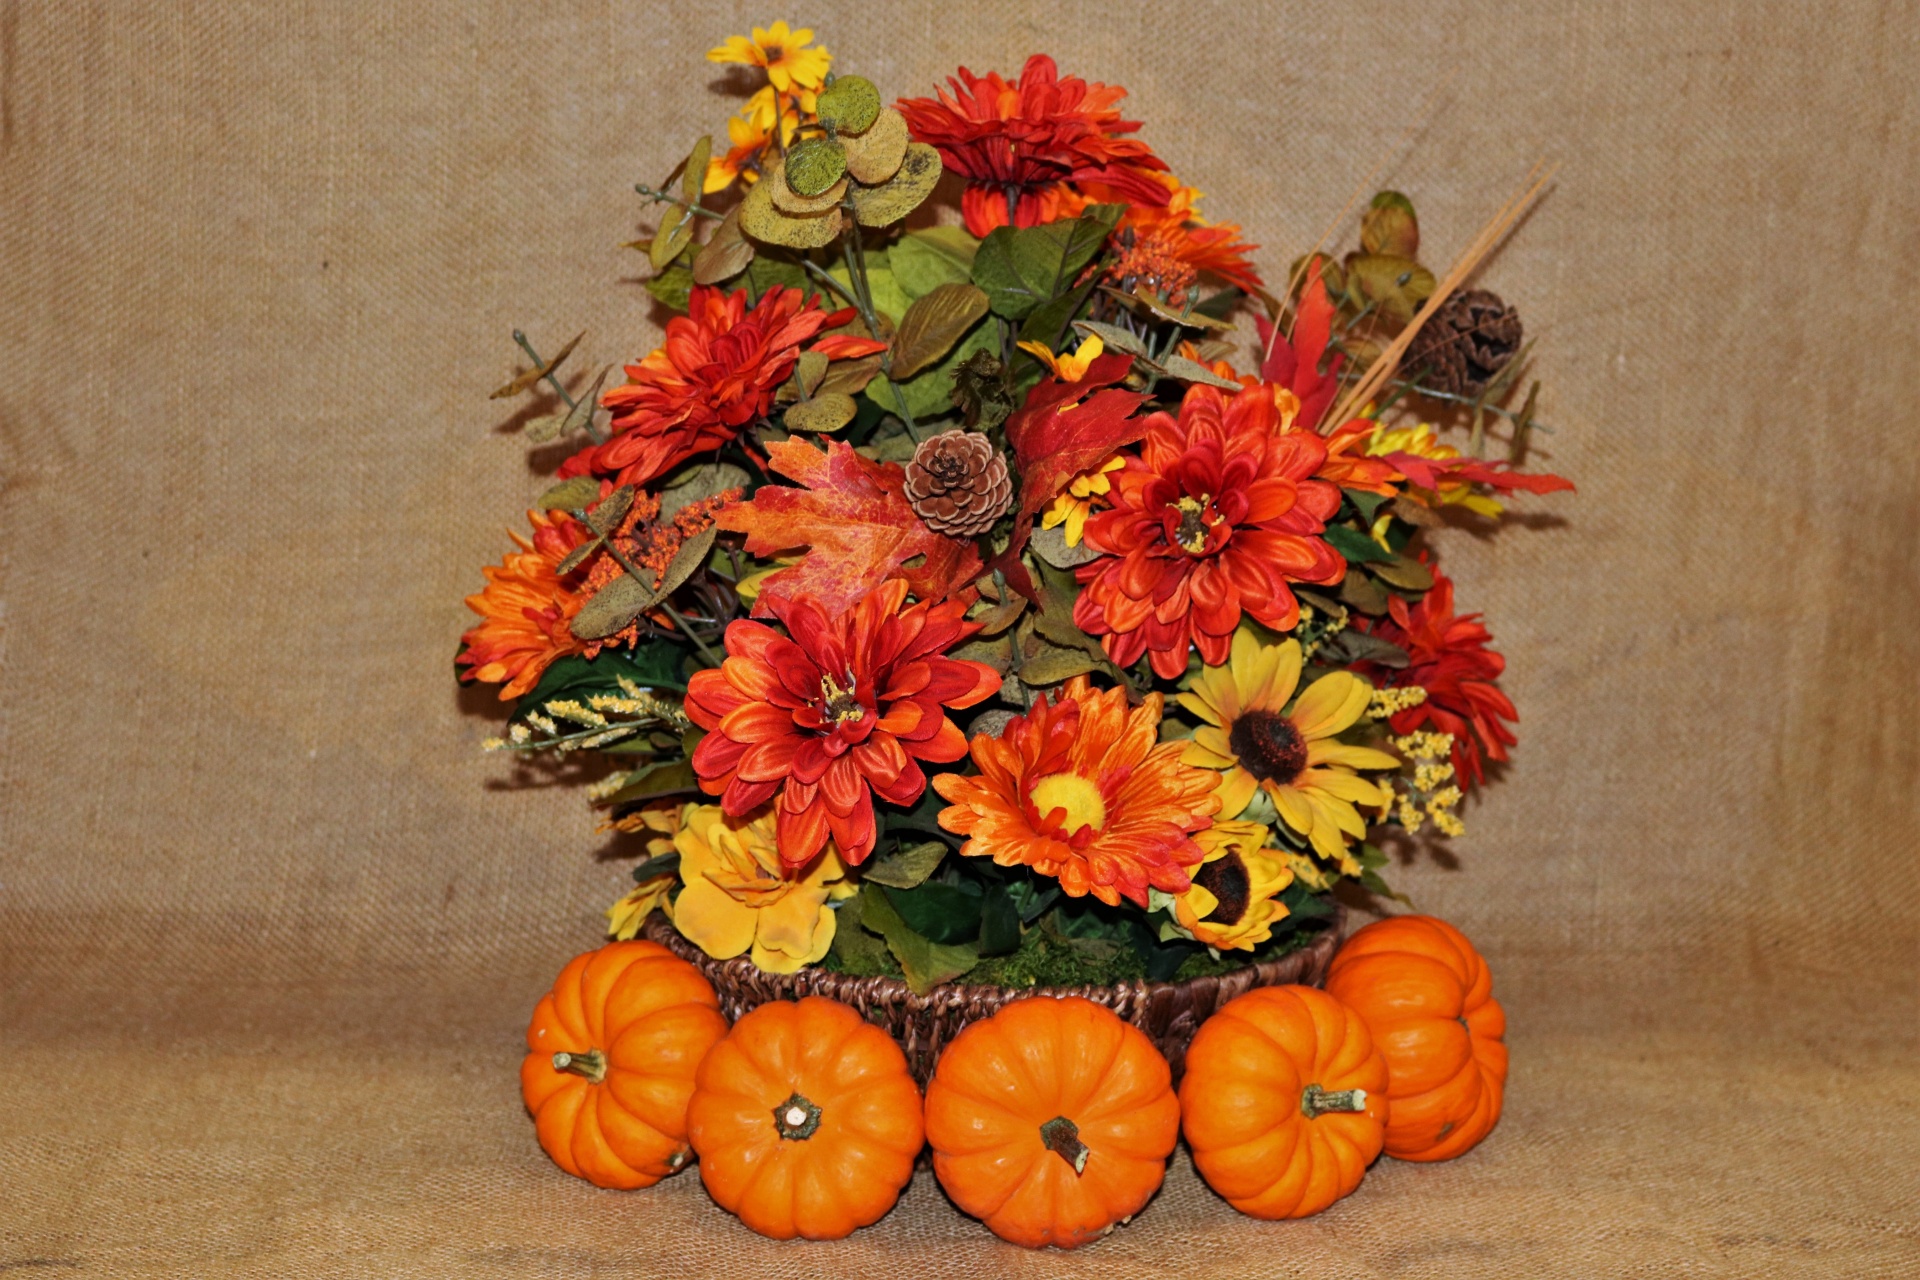 Pumpkins And Fall Flowers On Burlap